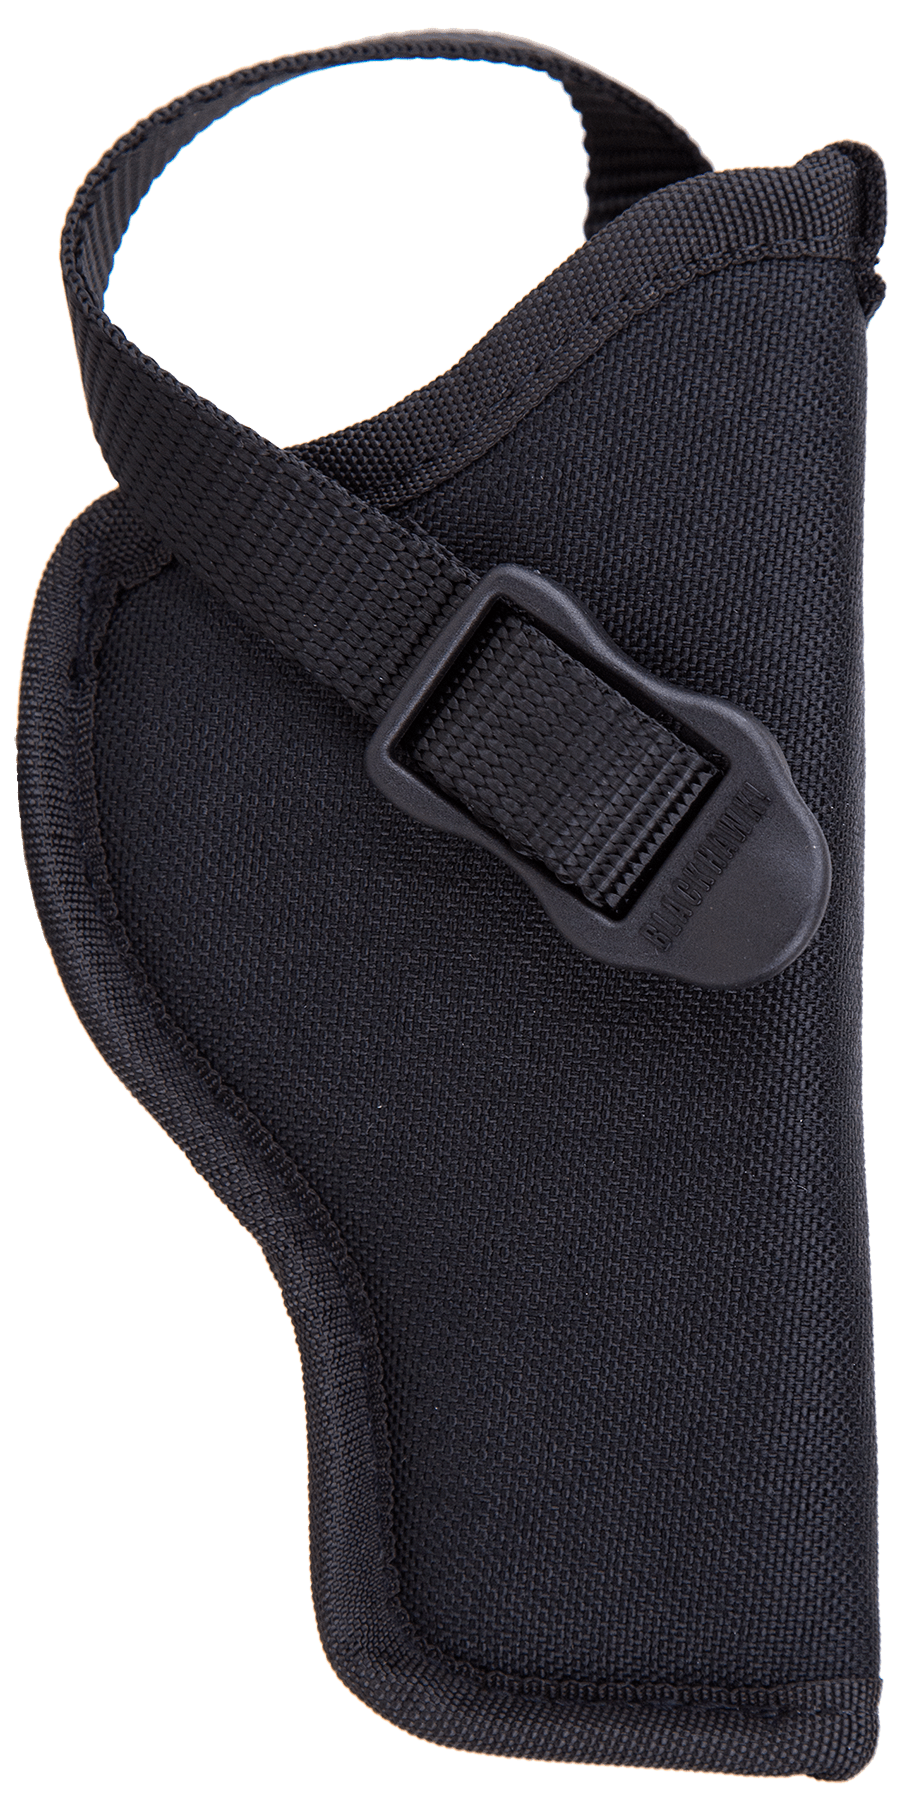 Blackhawk Blackhawk Hip Holster #12 Rh - Colt Single Action 3"-5" Black Holsters And Related Items